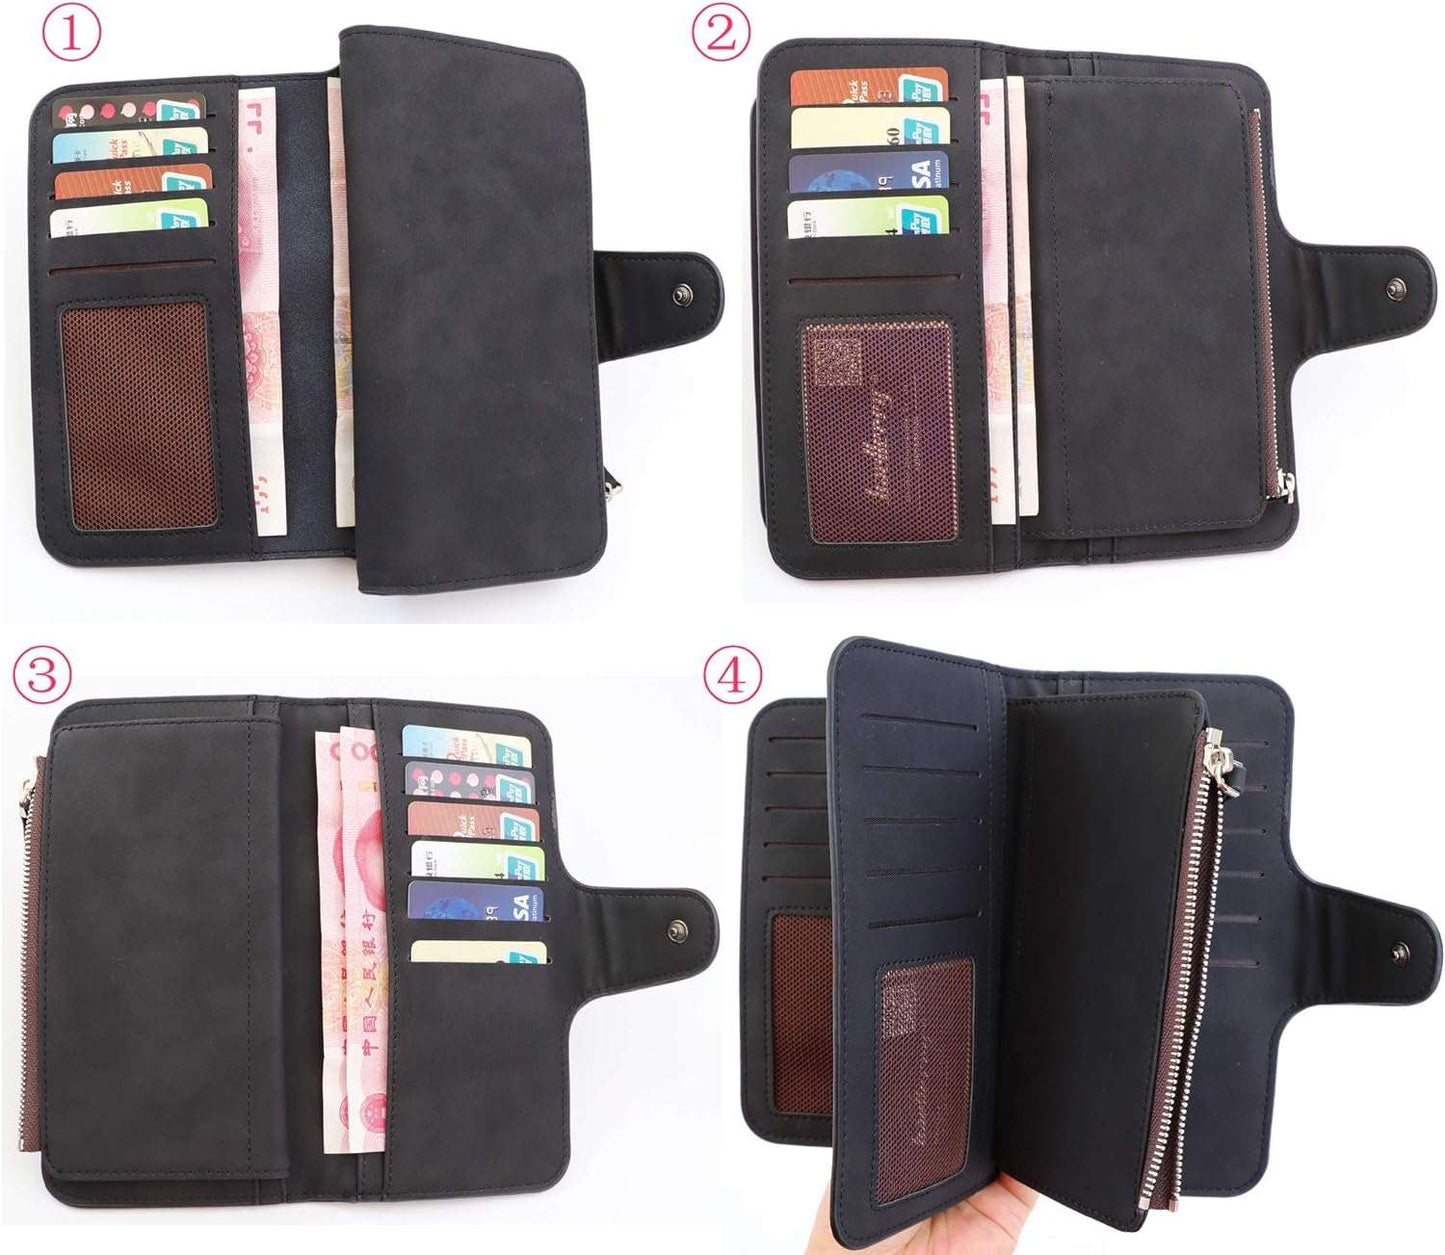 Women's Magnetic Clasp Wallet - Classic Leather Bag